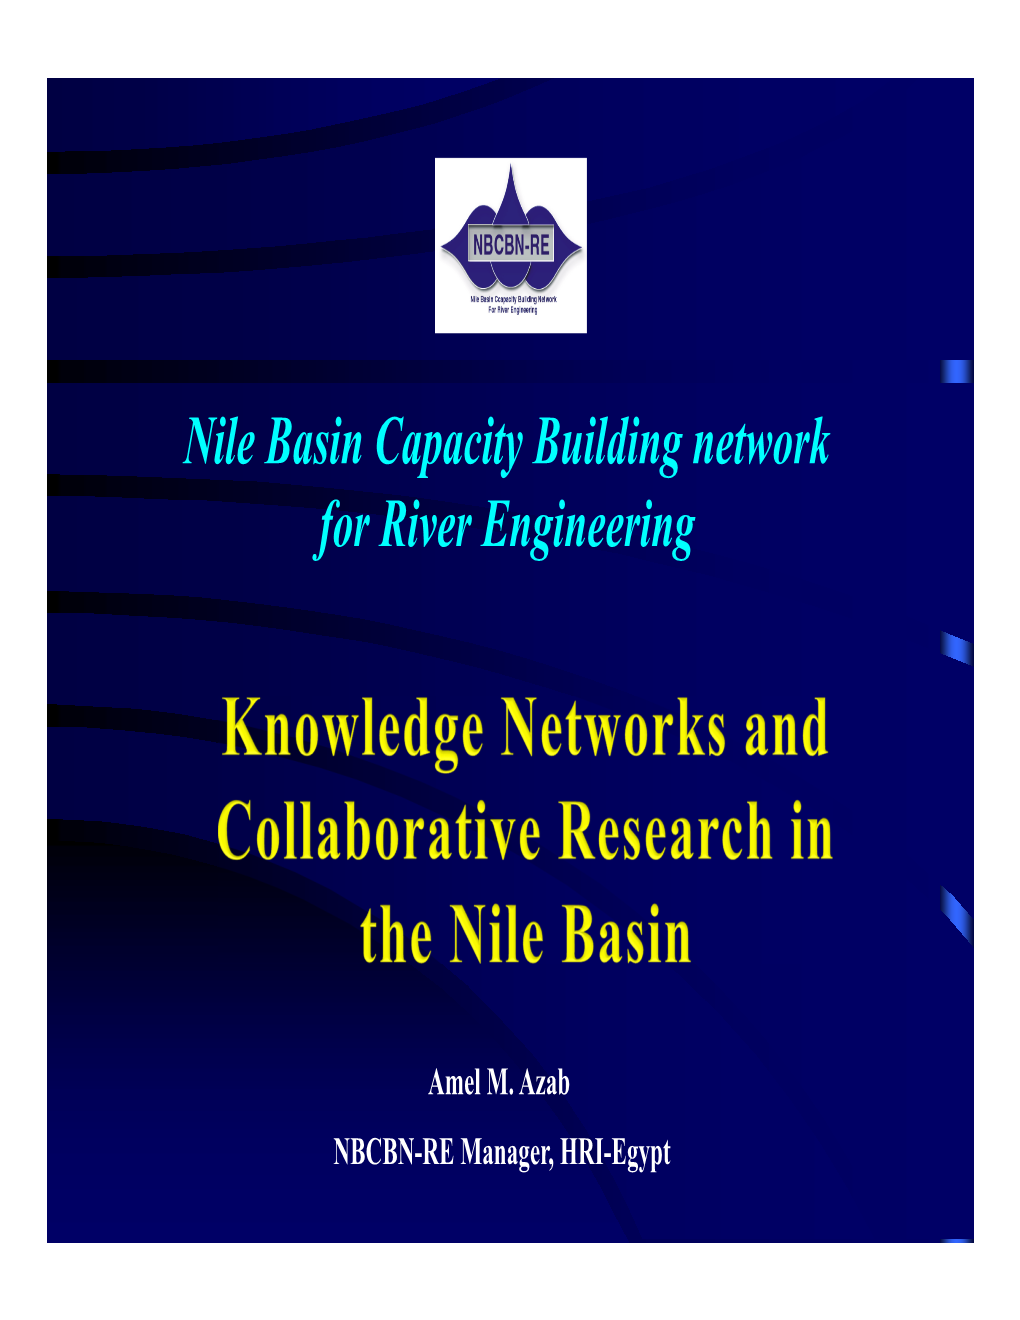 Nile Basin Capacity Building Network for River Engineering